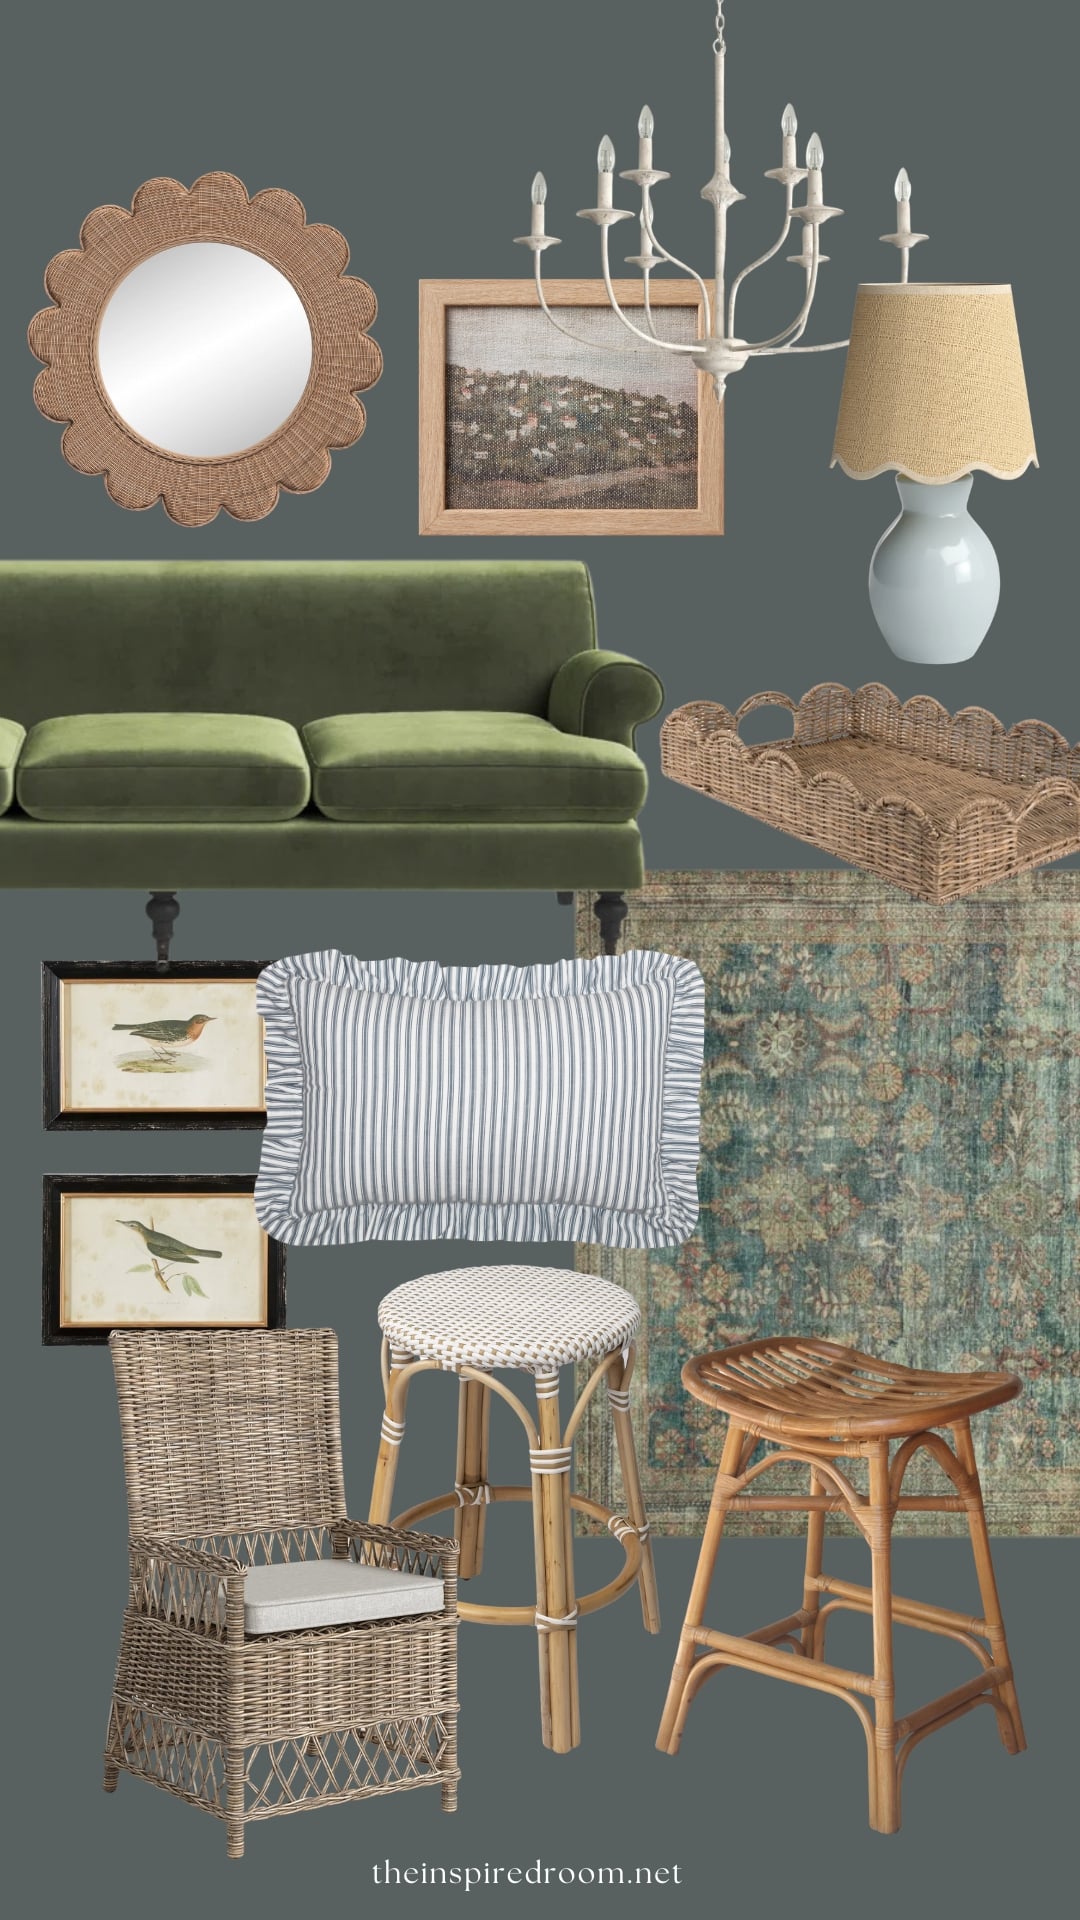 Interior Design Mood Boards by The Inspired Room